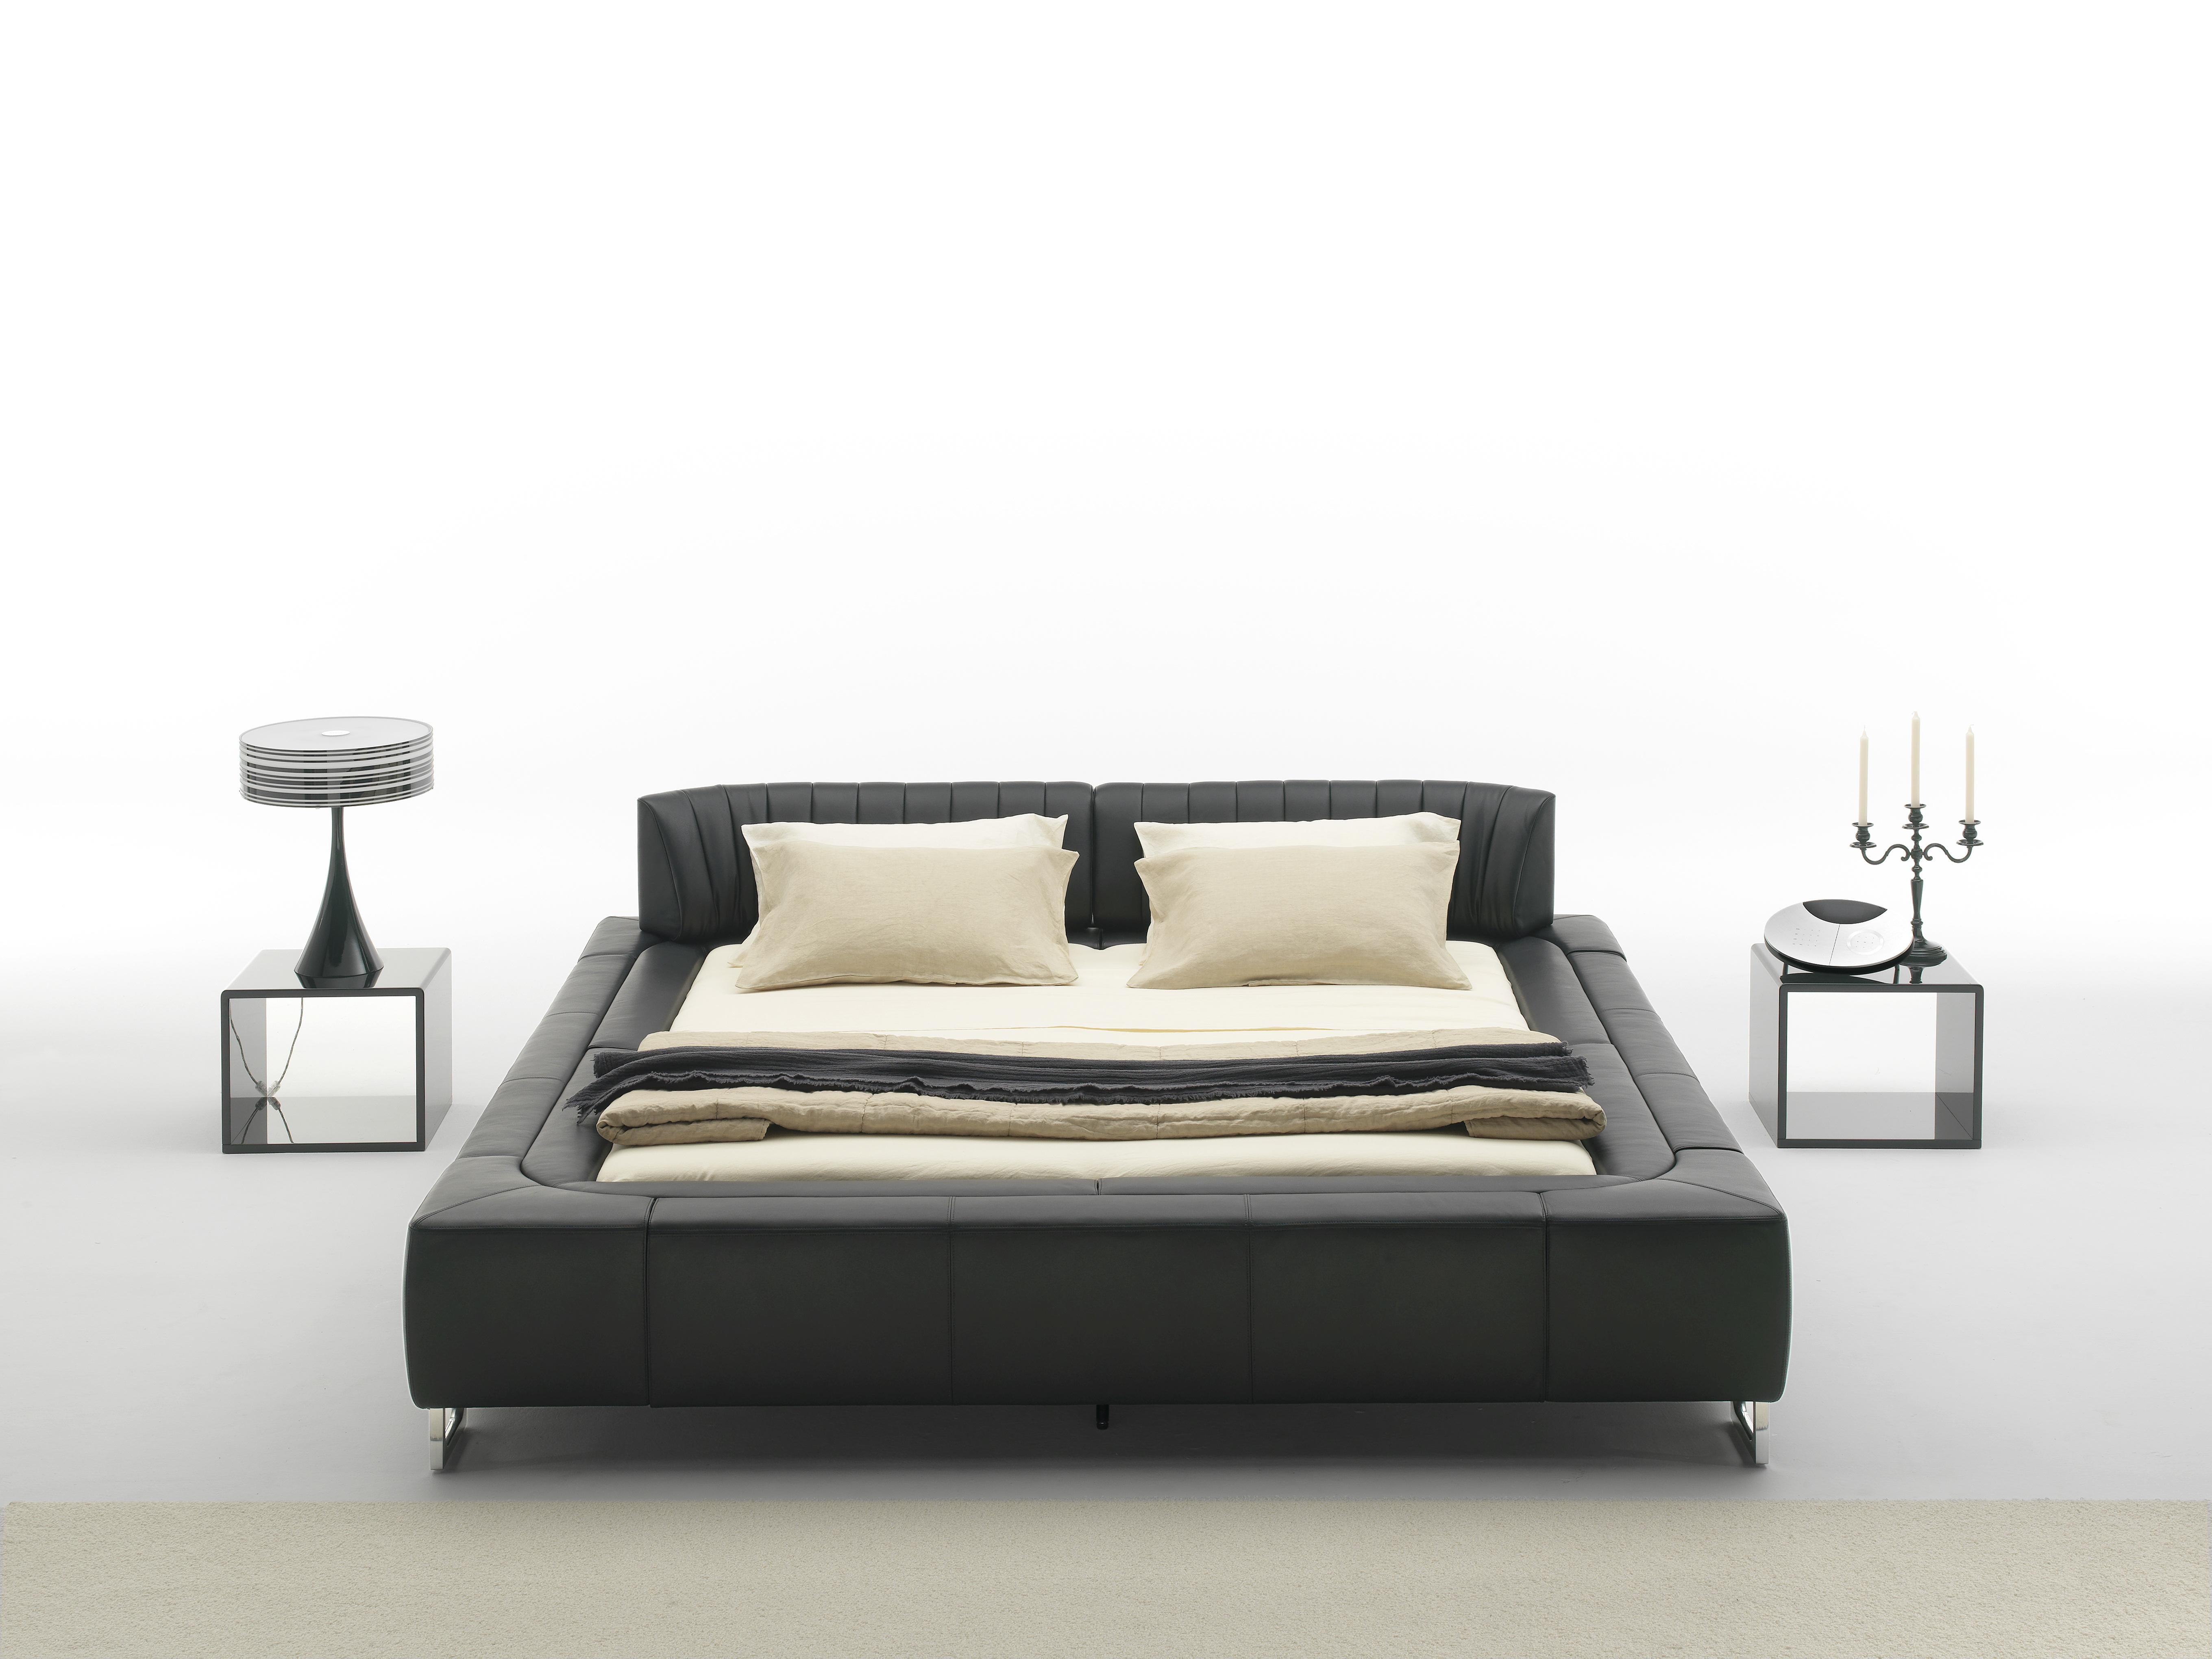 DS-1165 bed by De Sede.
Dimensions: D 262 x W 222 x H 47 cm.
Materials: metal construction, leather.

Prices may change according to the chosen materials and size. 

Playful design for sensual moments

Backrests can be easily and quickly